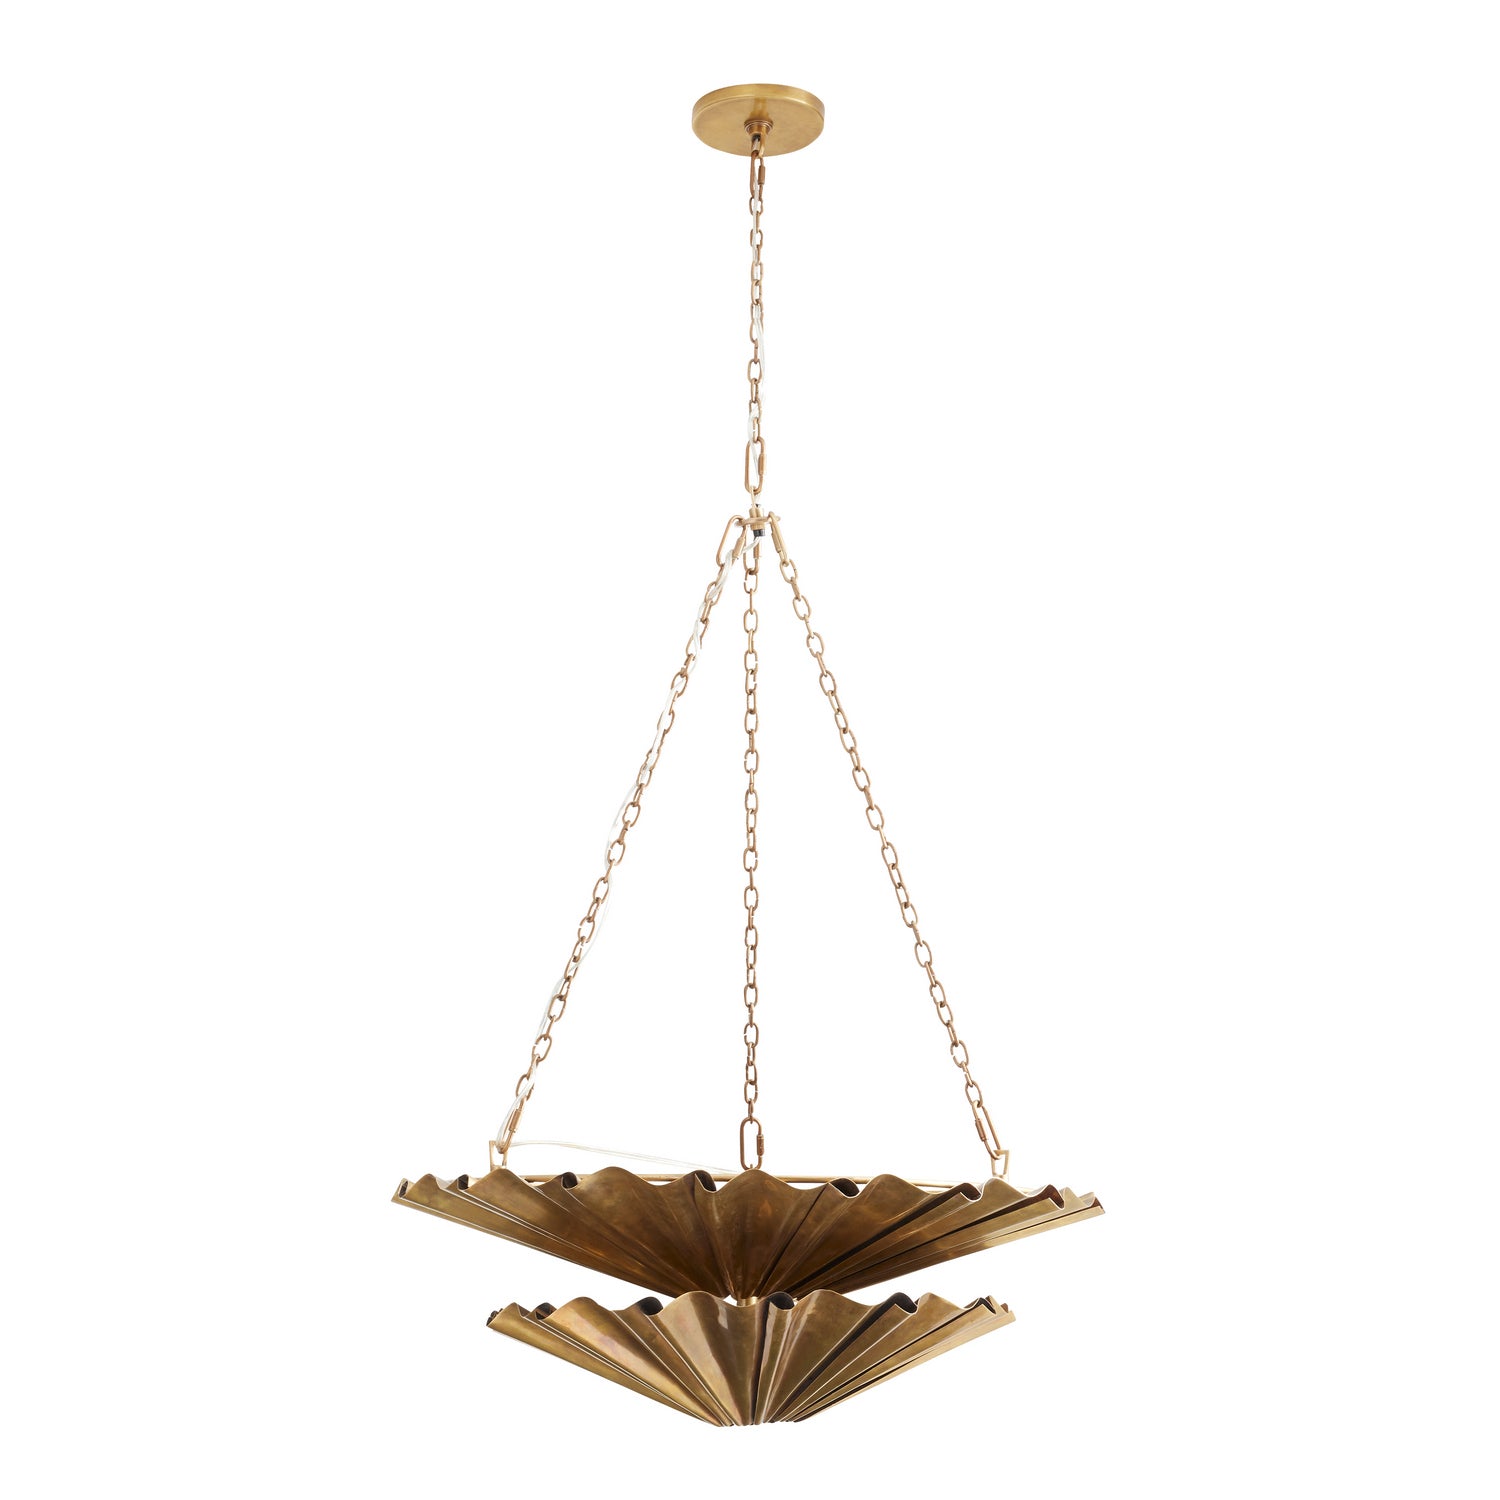 Nine Light Chandelier from the Katya collection in Vintage Brass finish